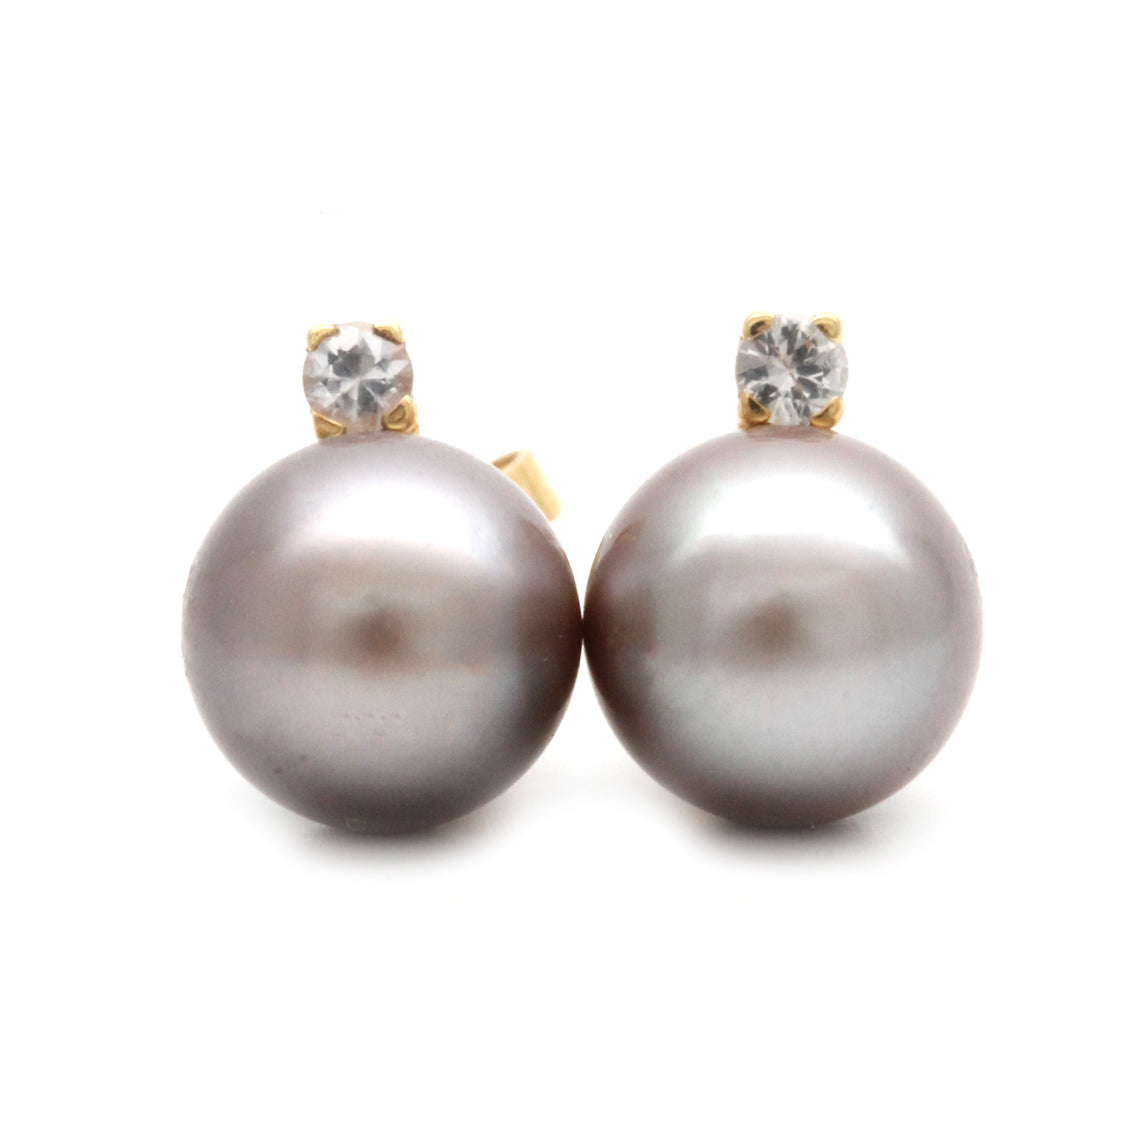 Bright Purple/Silvery Cortez Pearls on 14k earrings with Sapphires